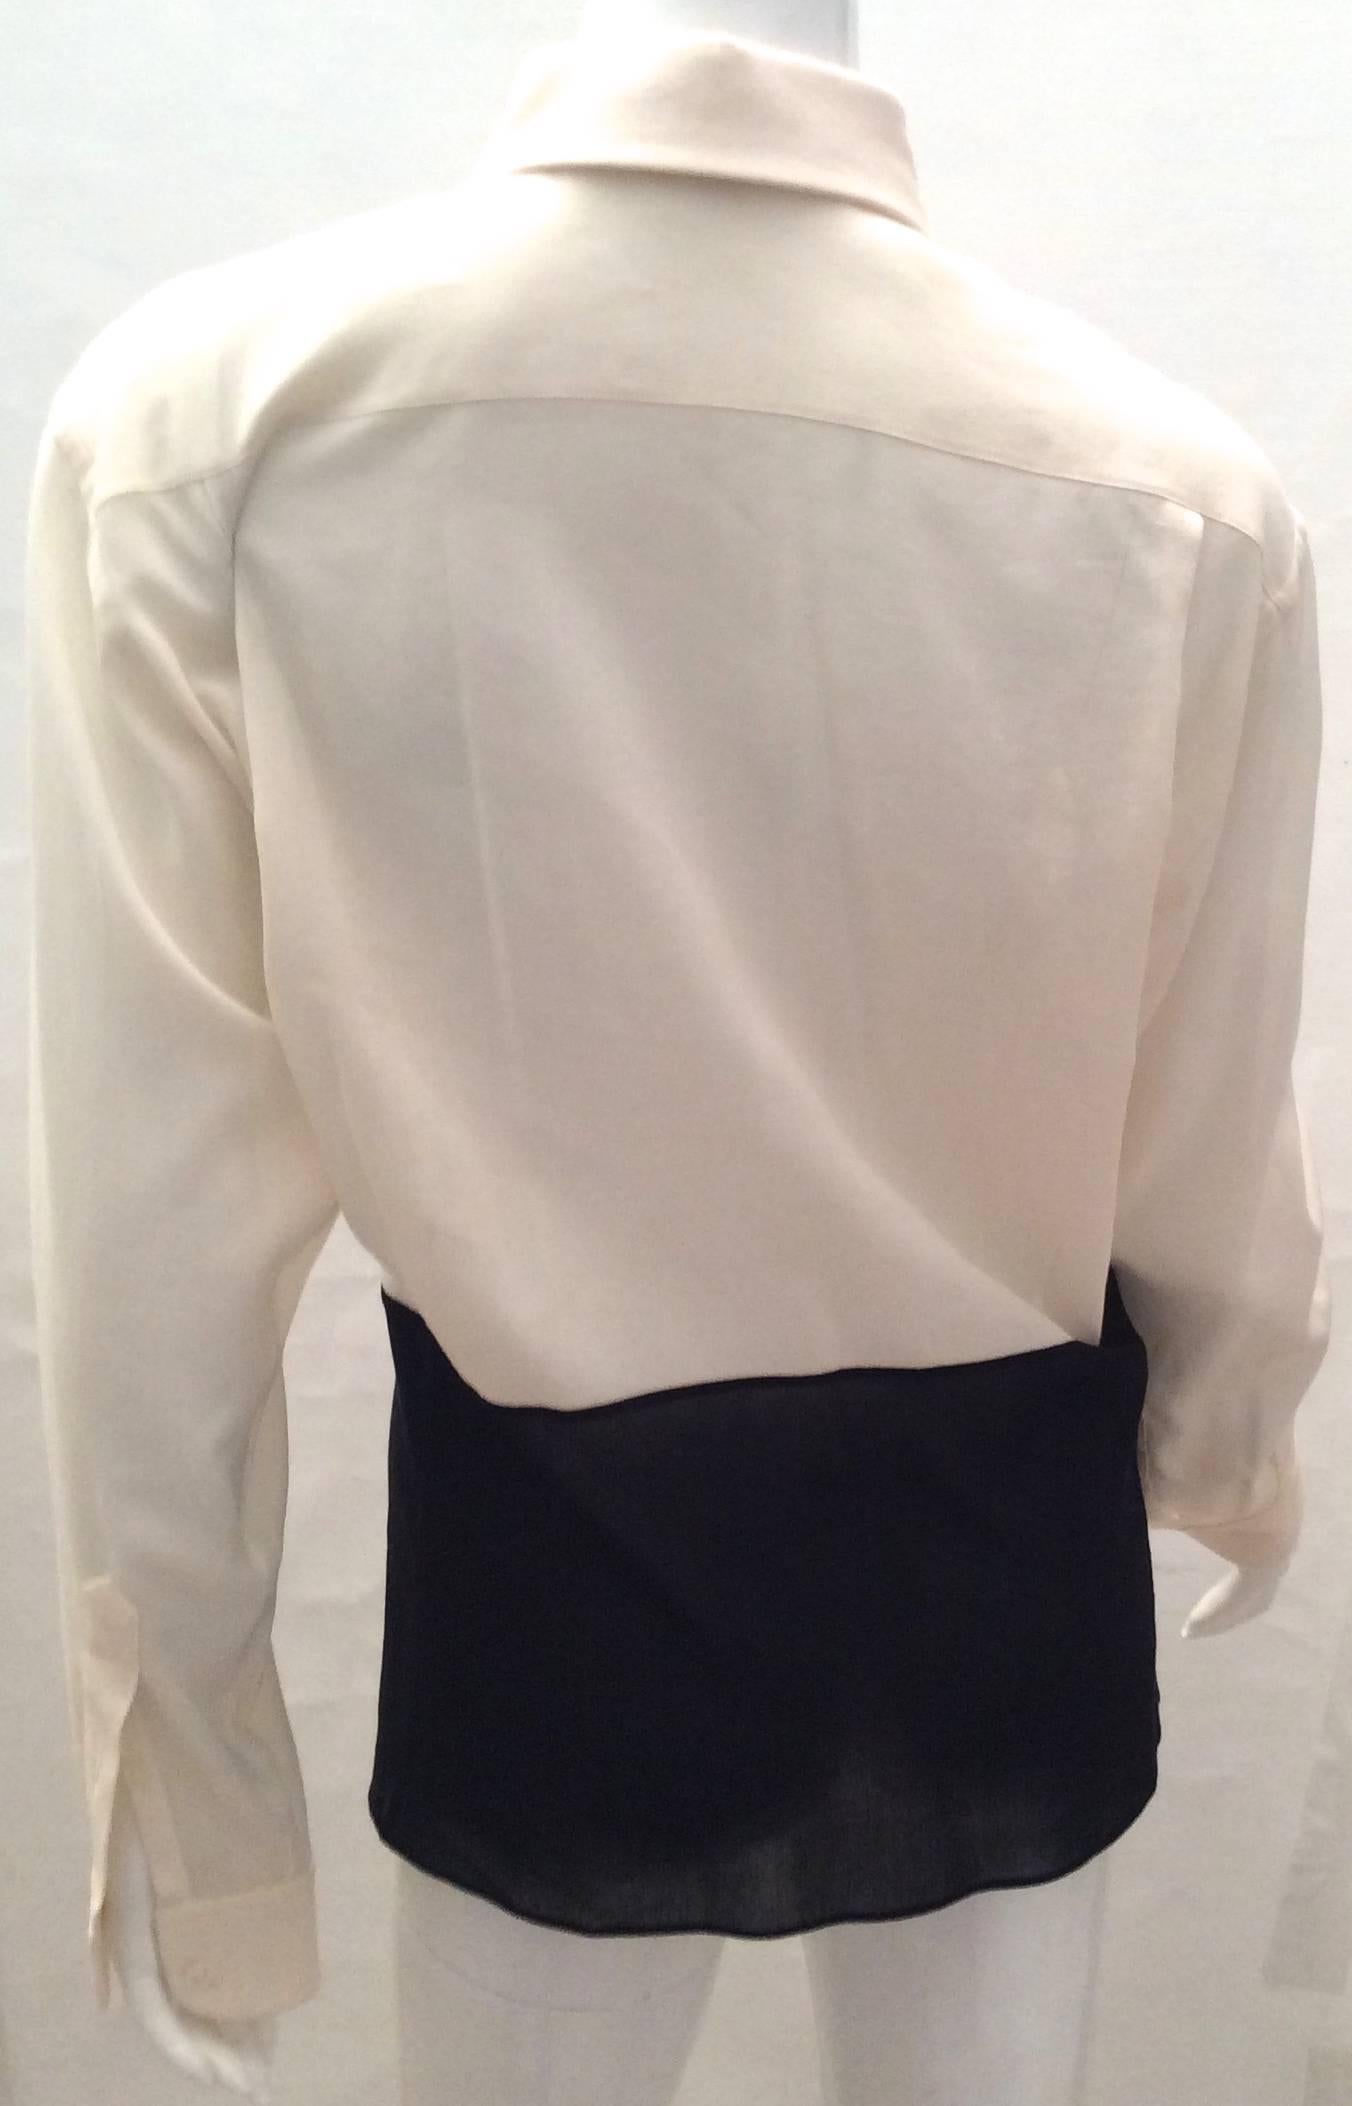 Presented here is a beautiful Hermes blouse that is a true classic. It is a size 40 and is comprised of 68% cotton and 32% silk. It is Hermes Paris and it was made in France. It is in excellent condition although it could probably use a professional